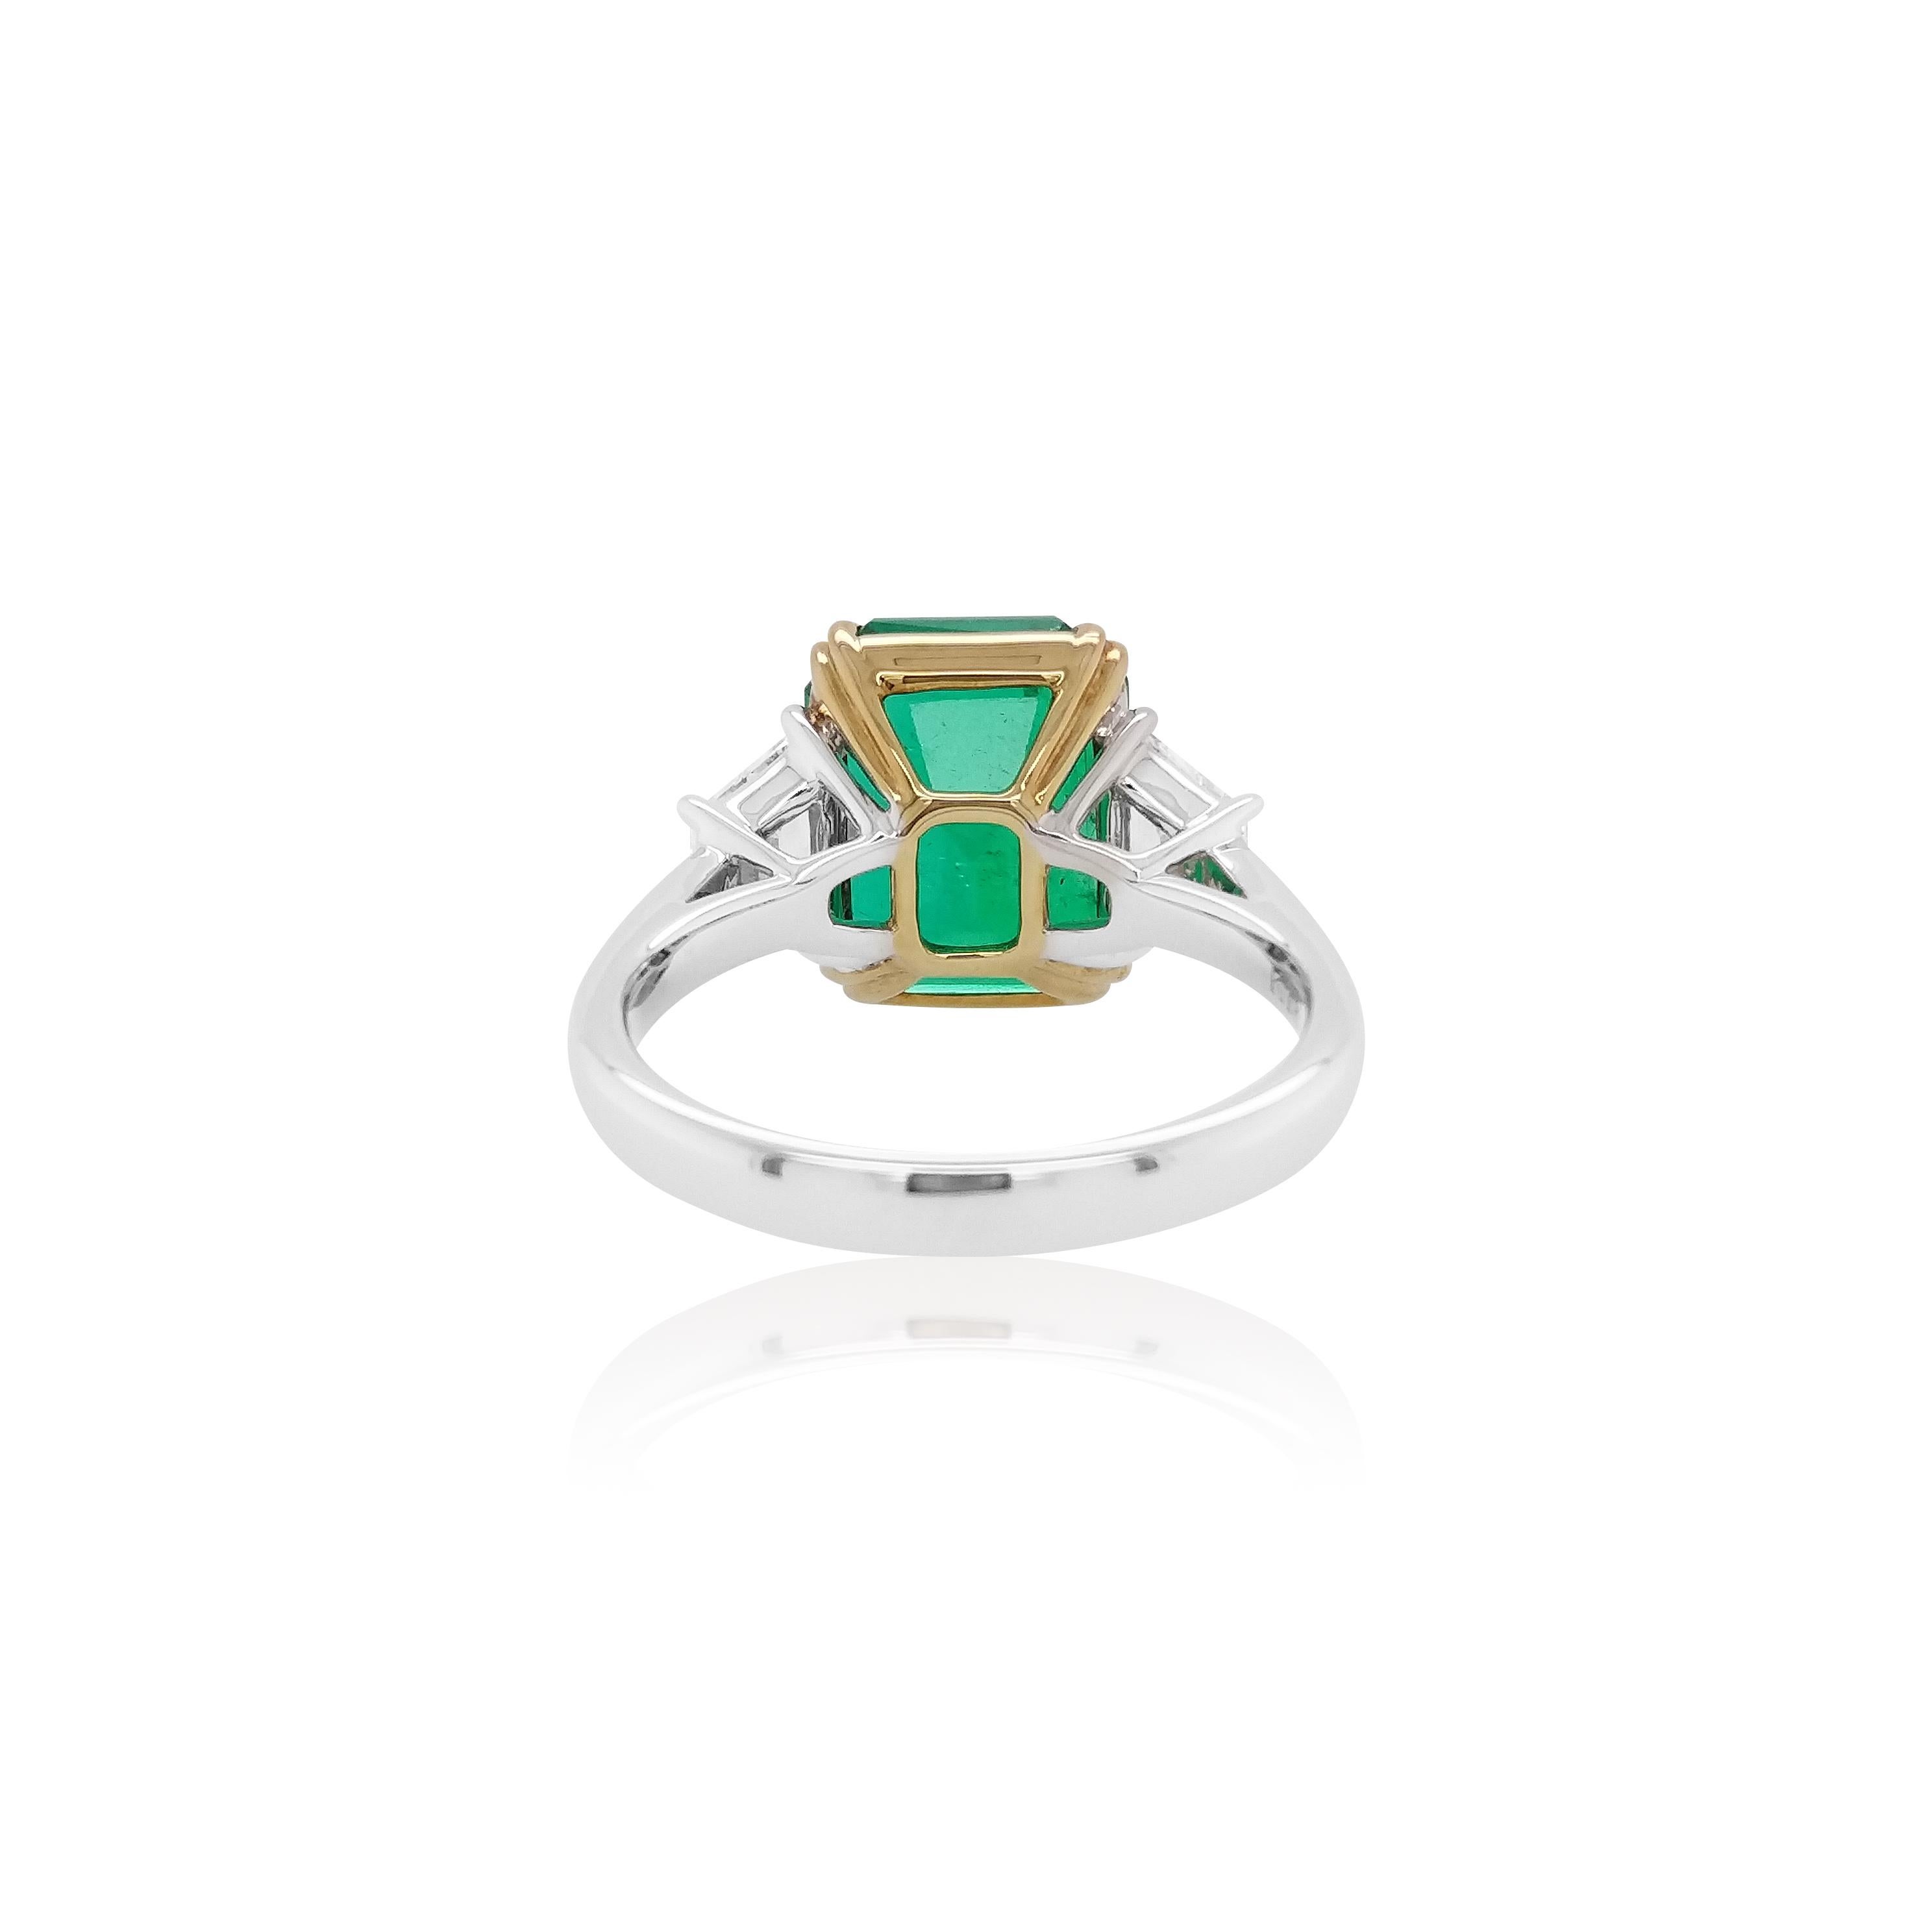 This unique ring features a spectacular Colombian Emerald, which is perfectly set between two trapezoid White Diamonds. This striking ring will add a touch of contemporary elegance to any outfit it is paired with.
-	Emerald-Cut Natural Colombian